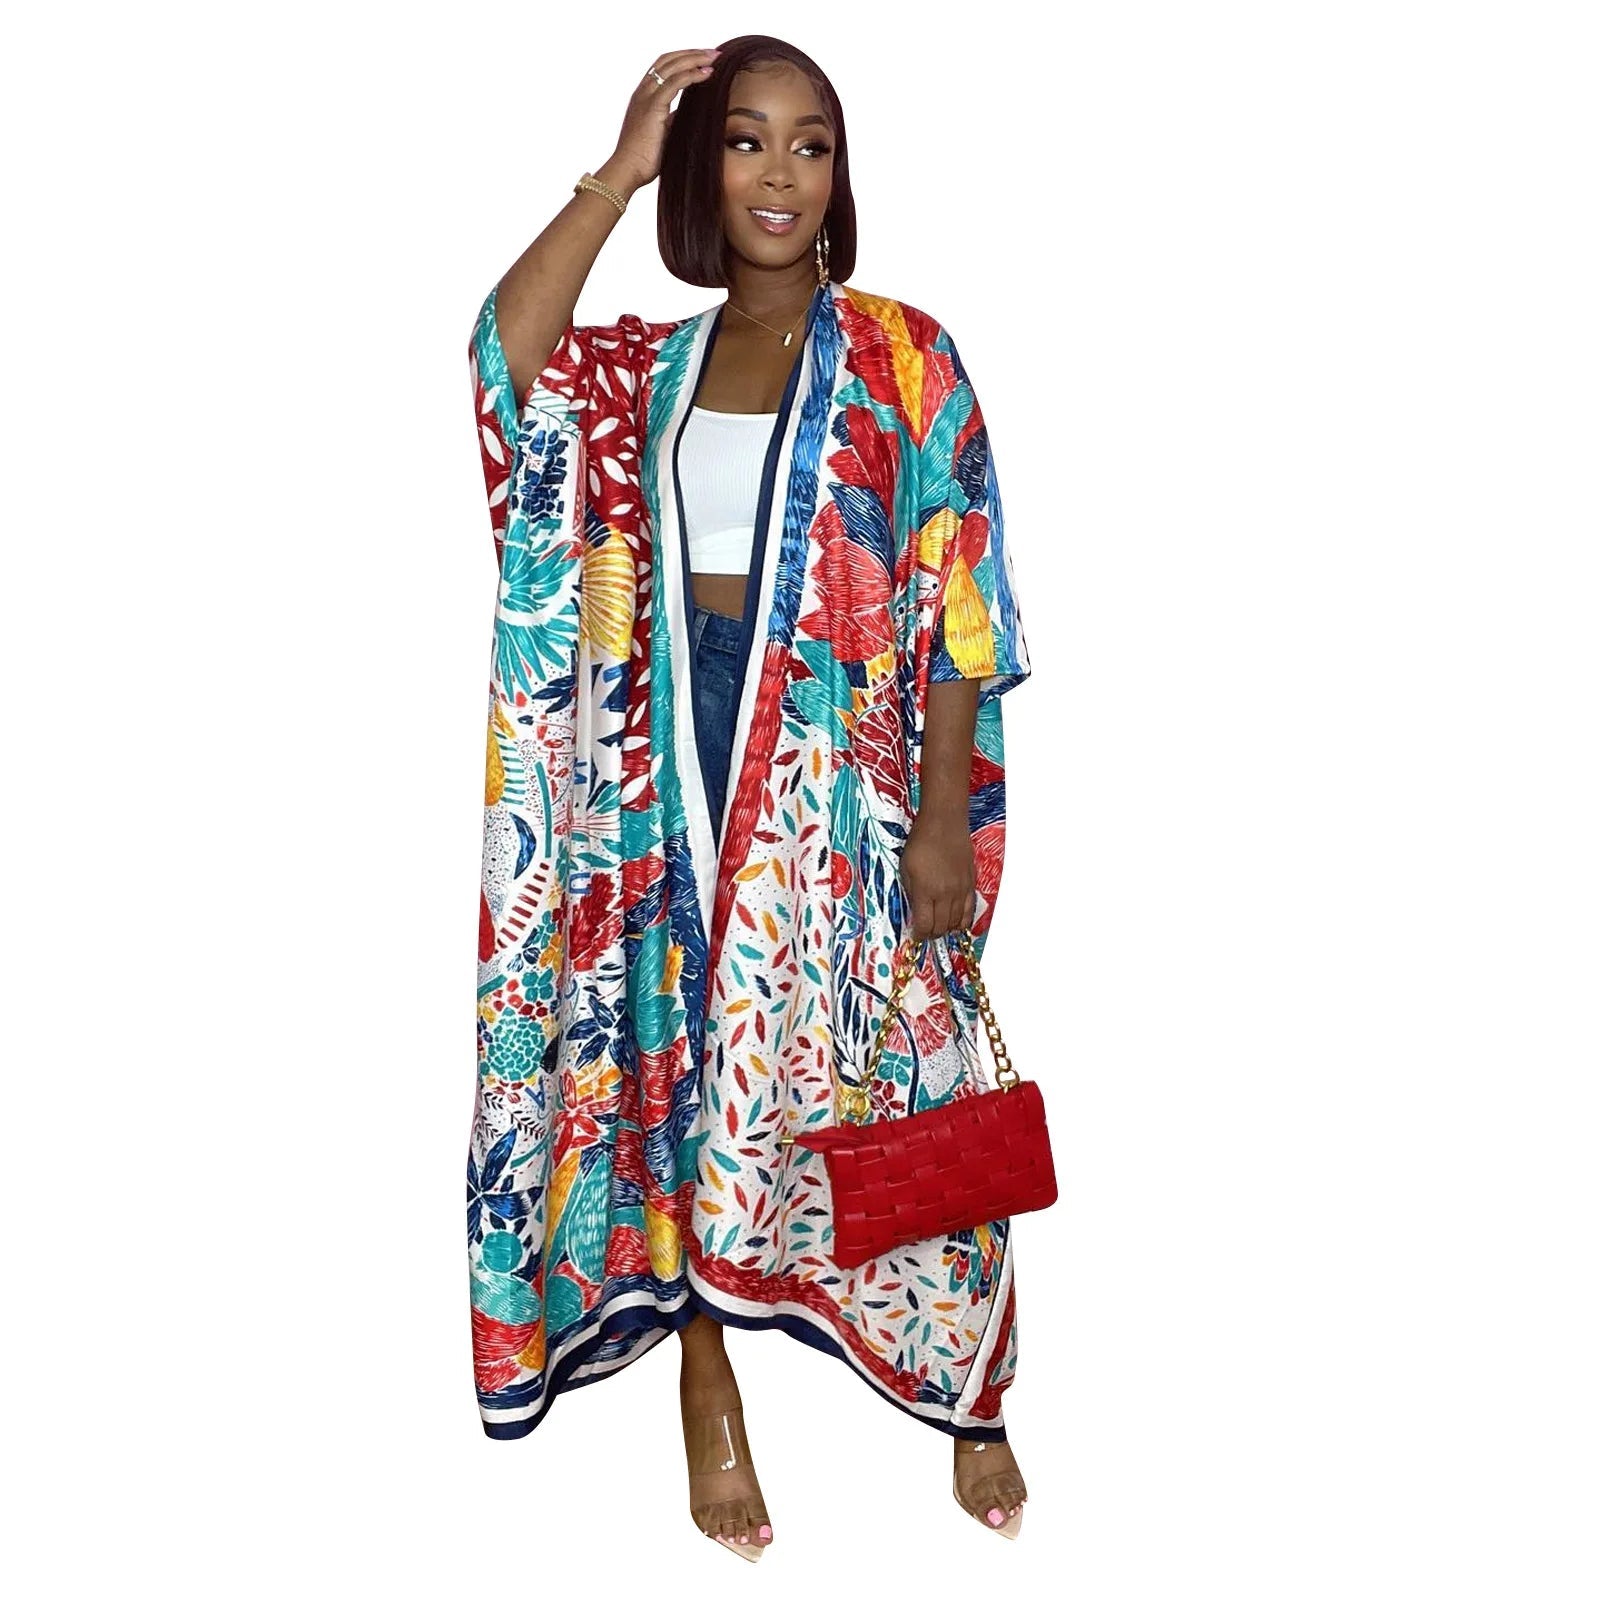 Bohemian Printed Beach Cover Up Kimono for Women - Vintage Style Bikini and Bathing Suit Wraps - Flexi Africa - Free Delivery Worldwide only at www.flexiafrica.com